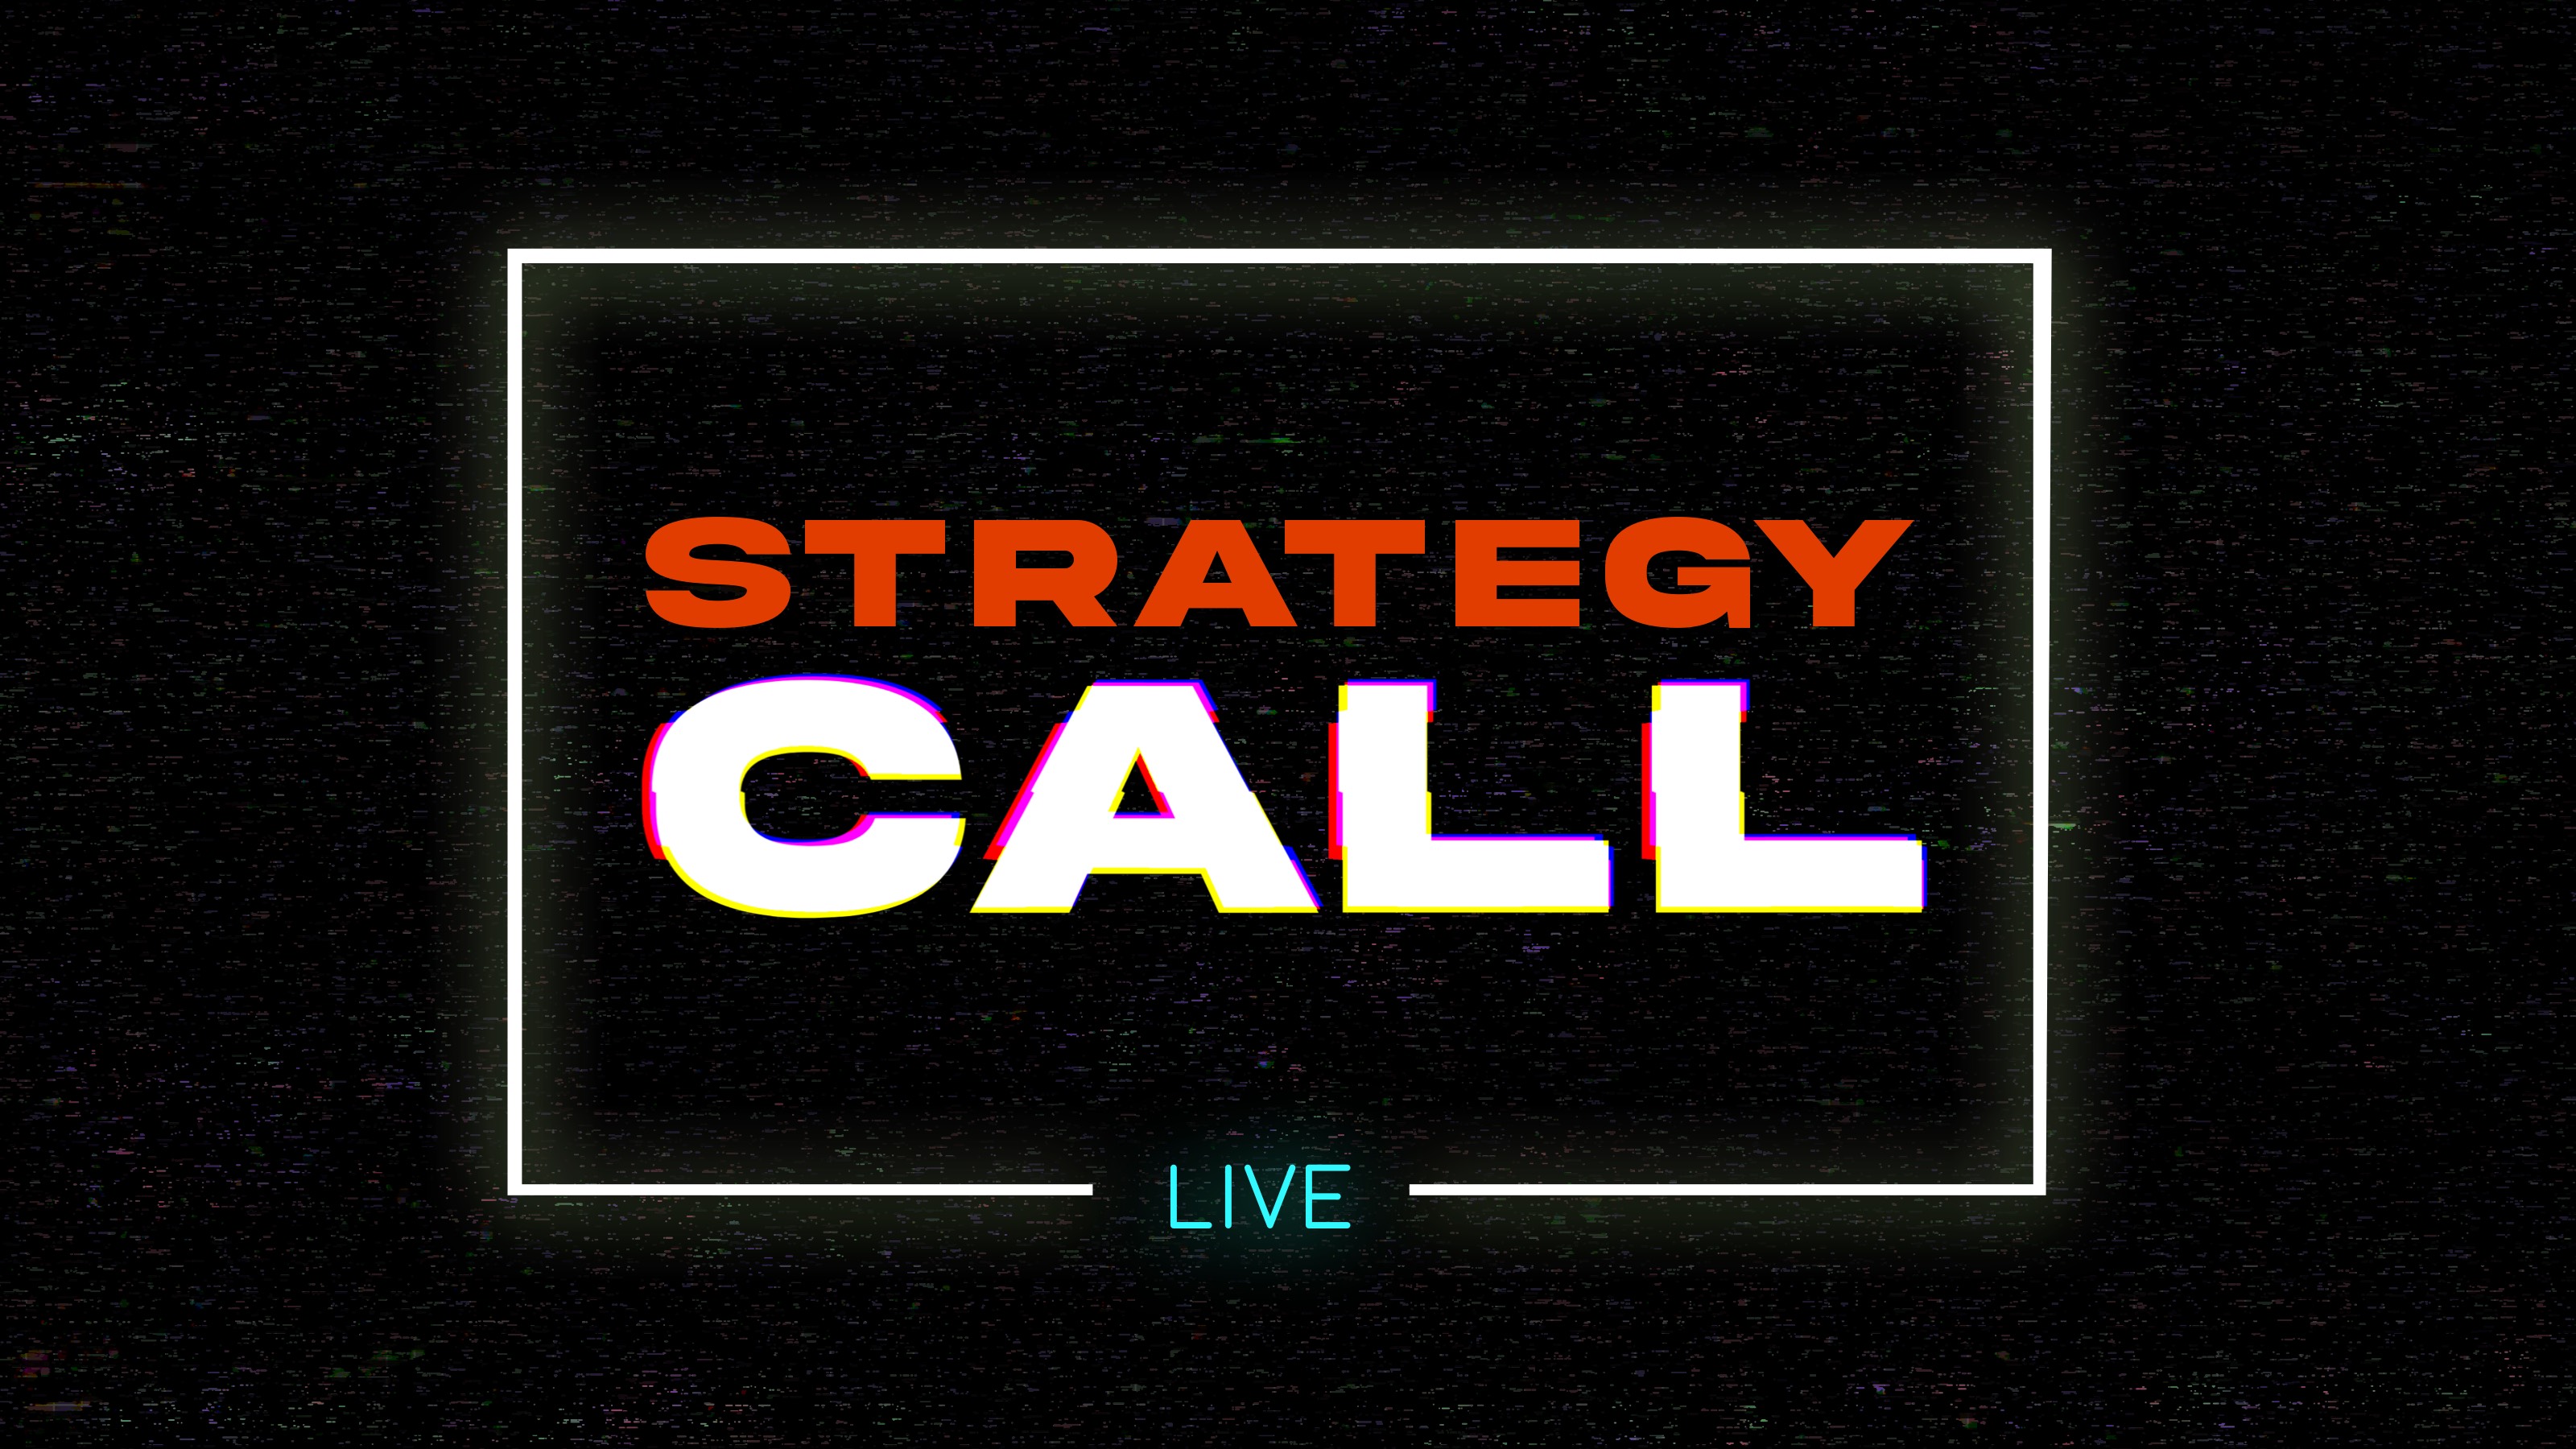 The Strategy Call